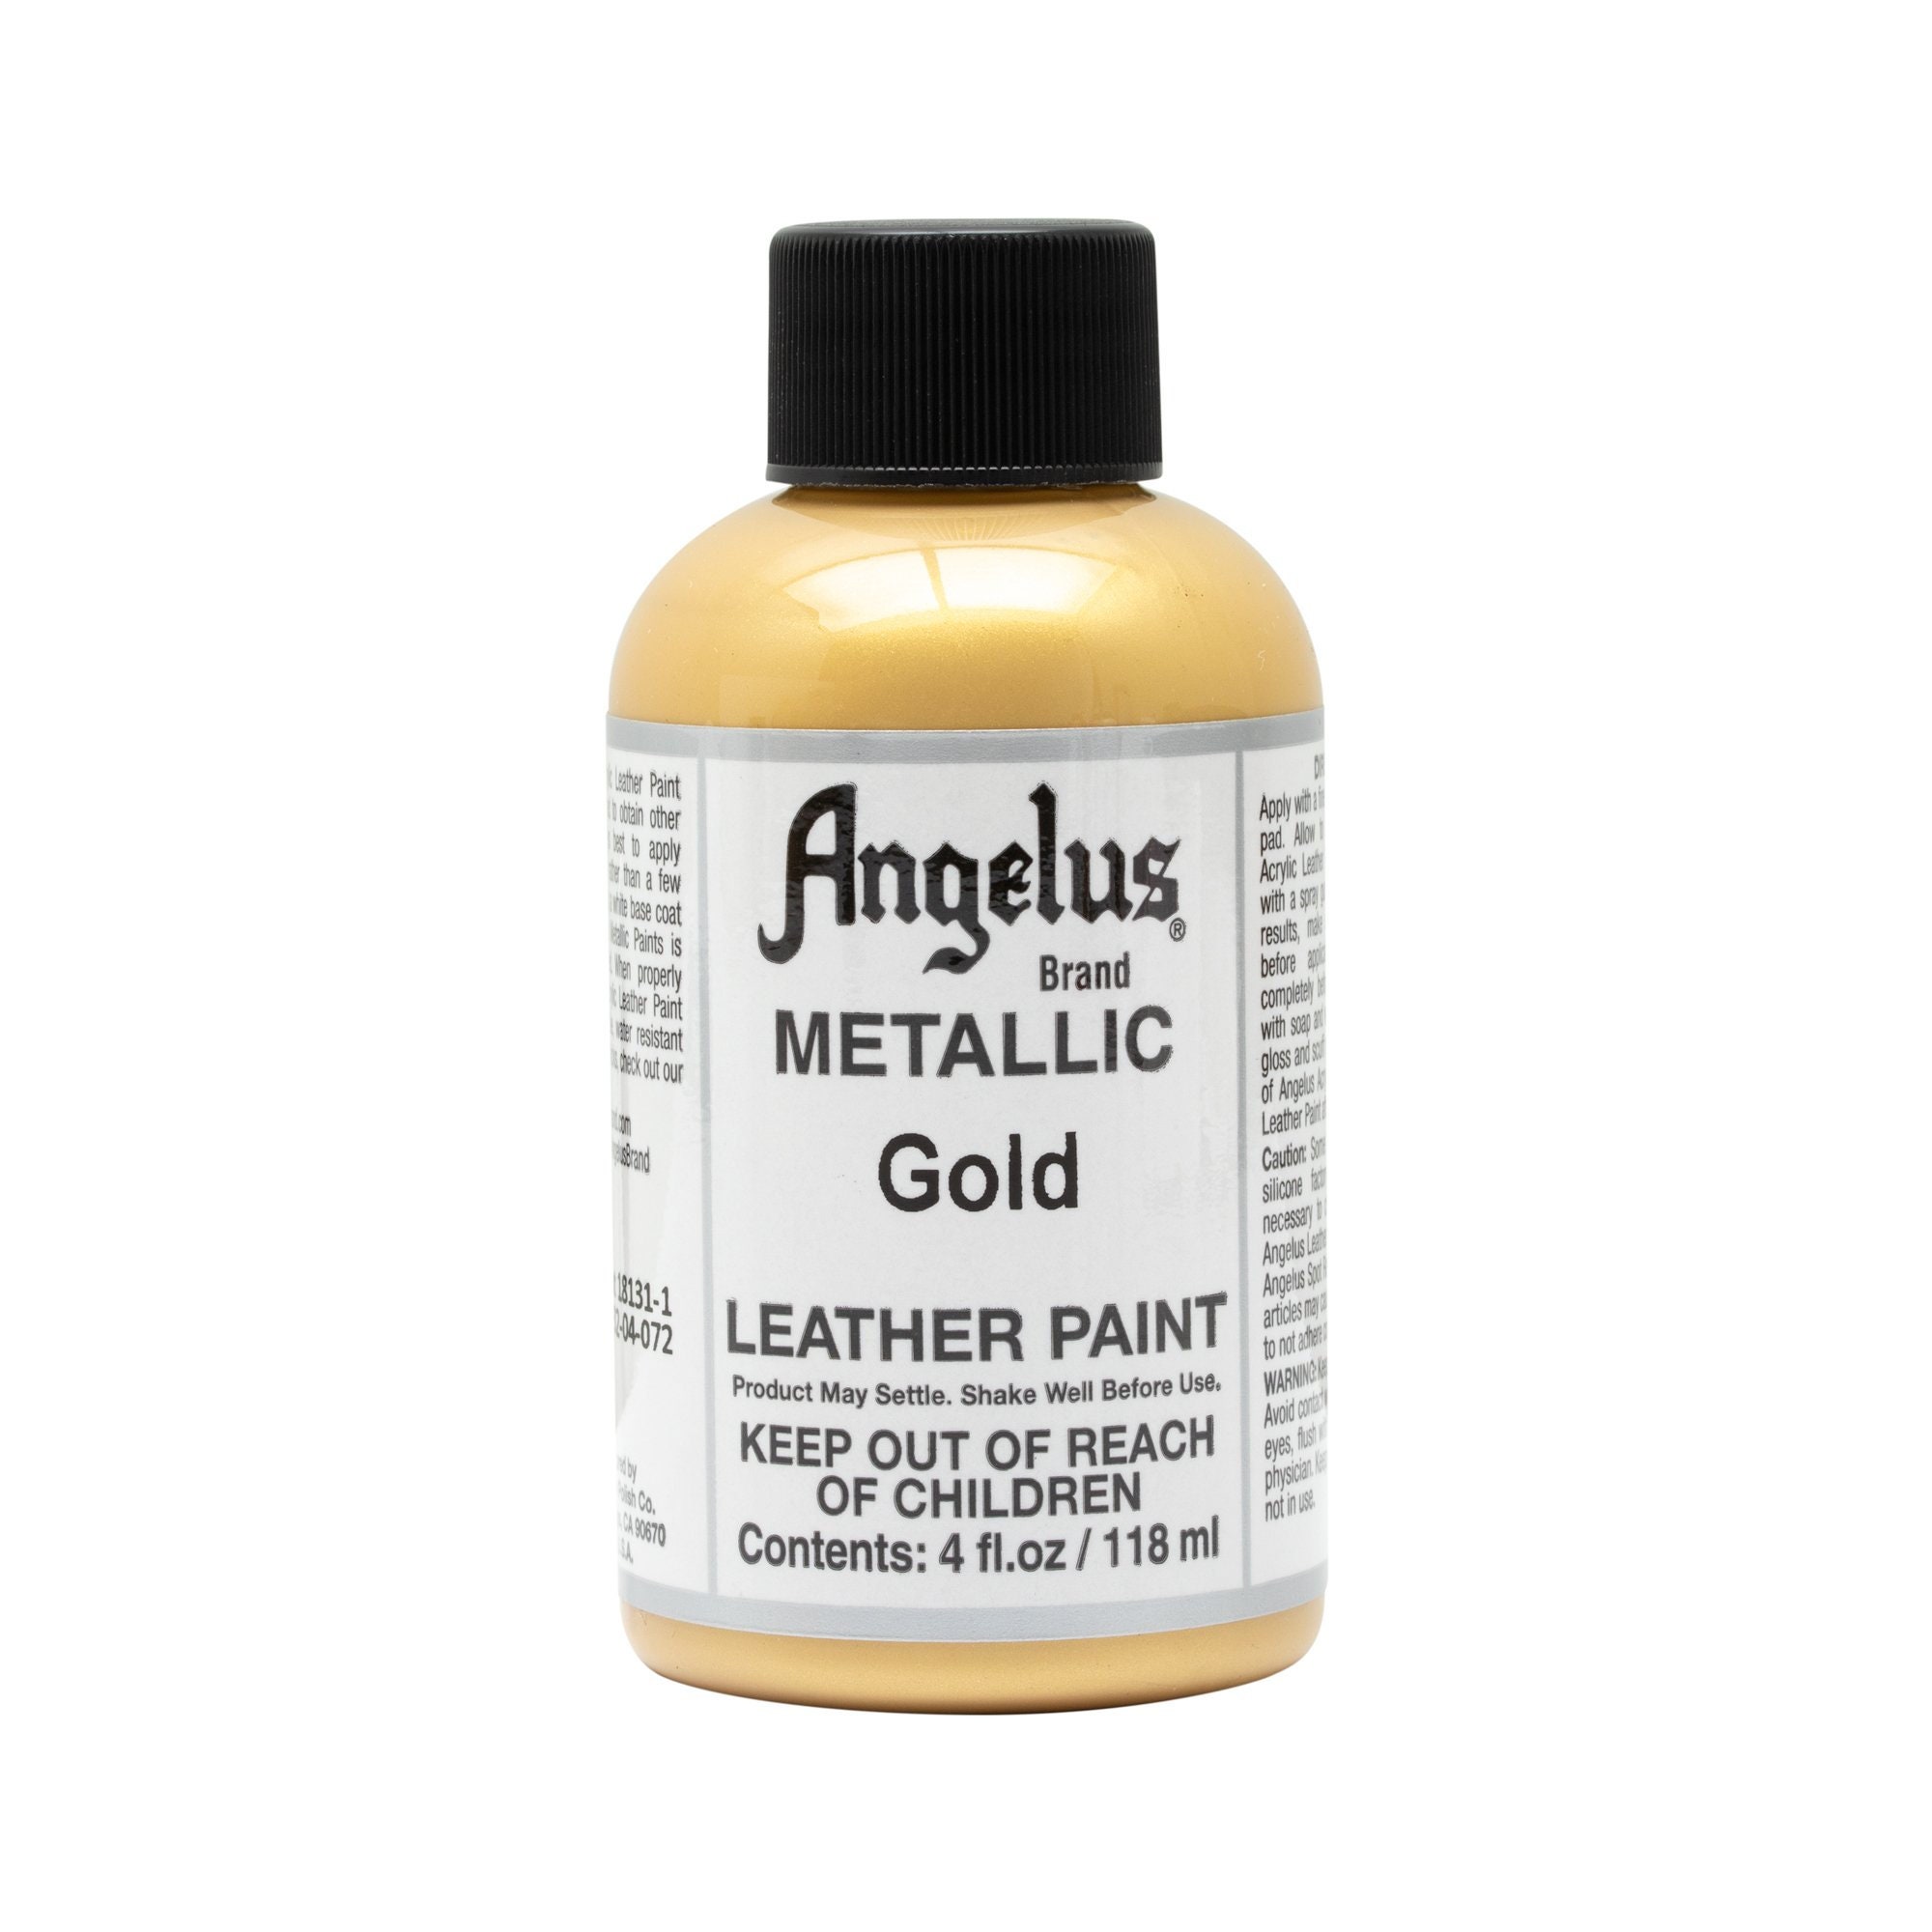 Angelus Pearlescent Paint 18k Gold / 1oz and 4oz Bottles / Metallic Leather  Paint 